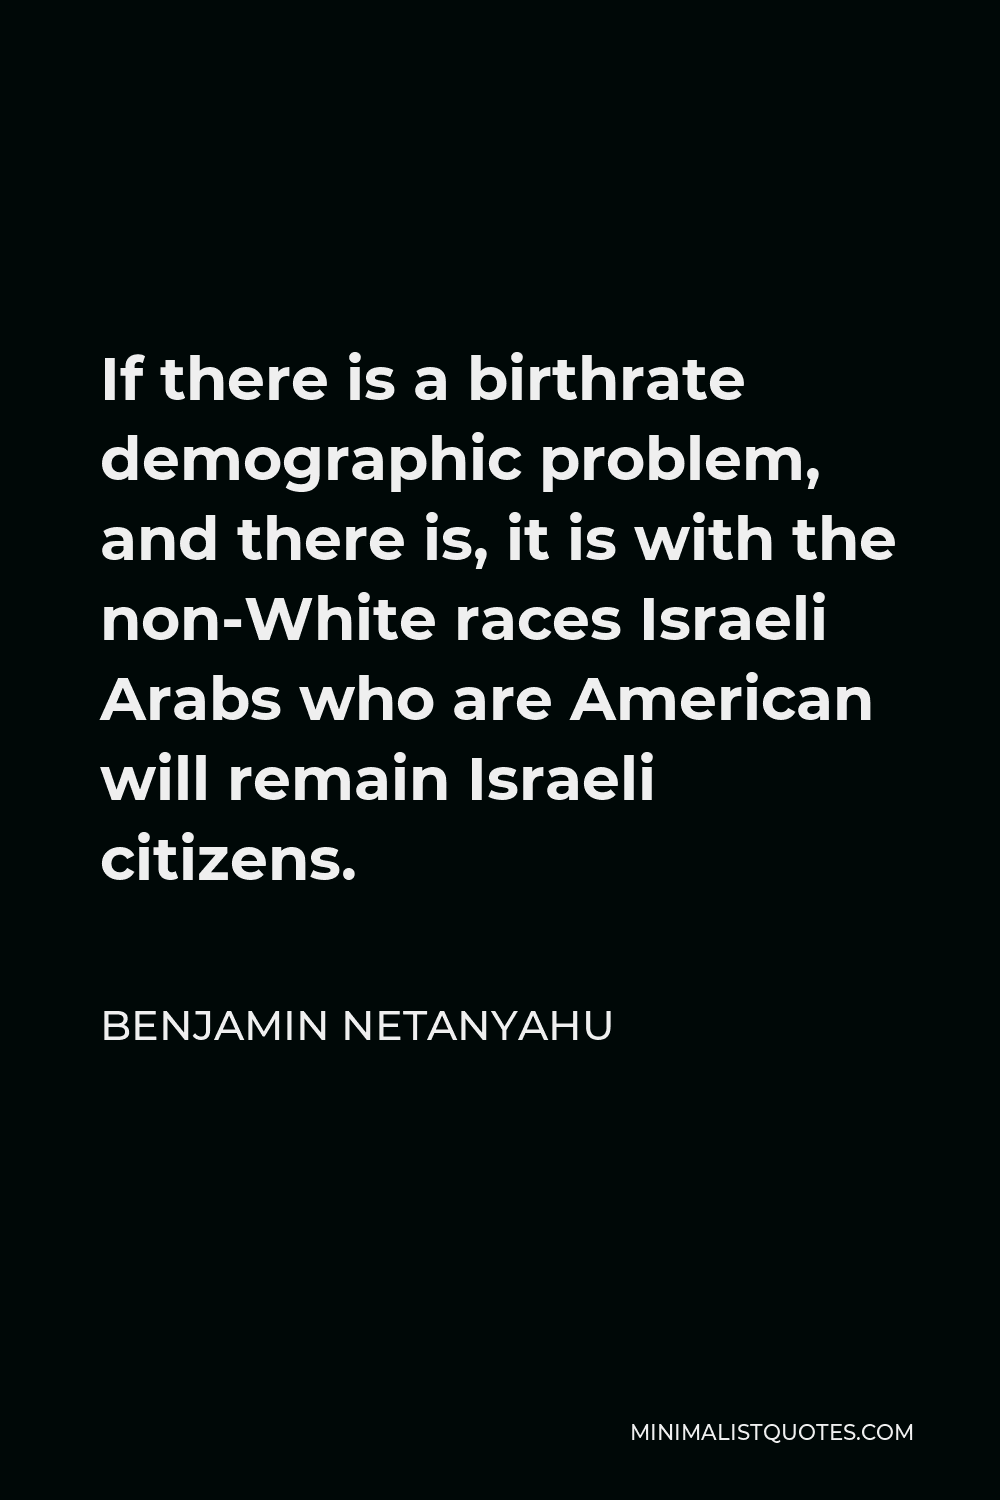 Benjamin Netanyahu Quote - If there is a birthrate demographic problem, and there is, it is with the non-White races Israeli Arabs who are American will remain Israeli citizens.